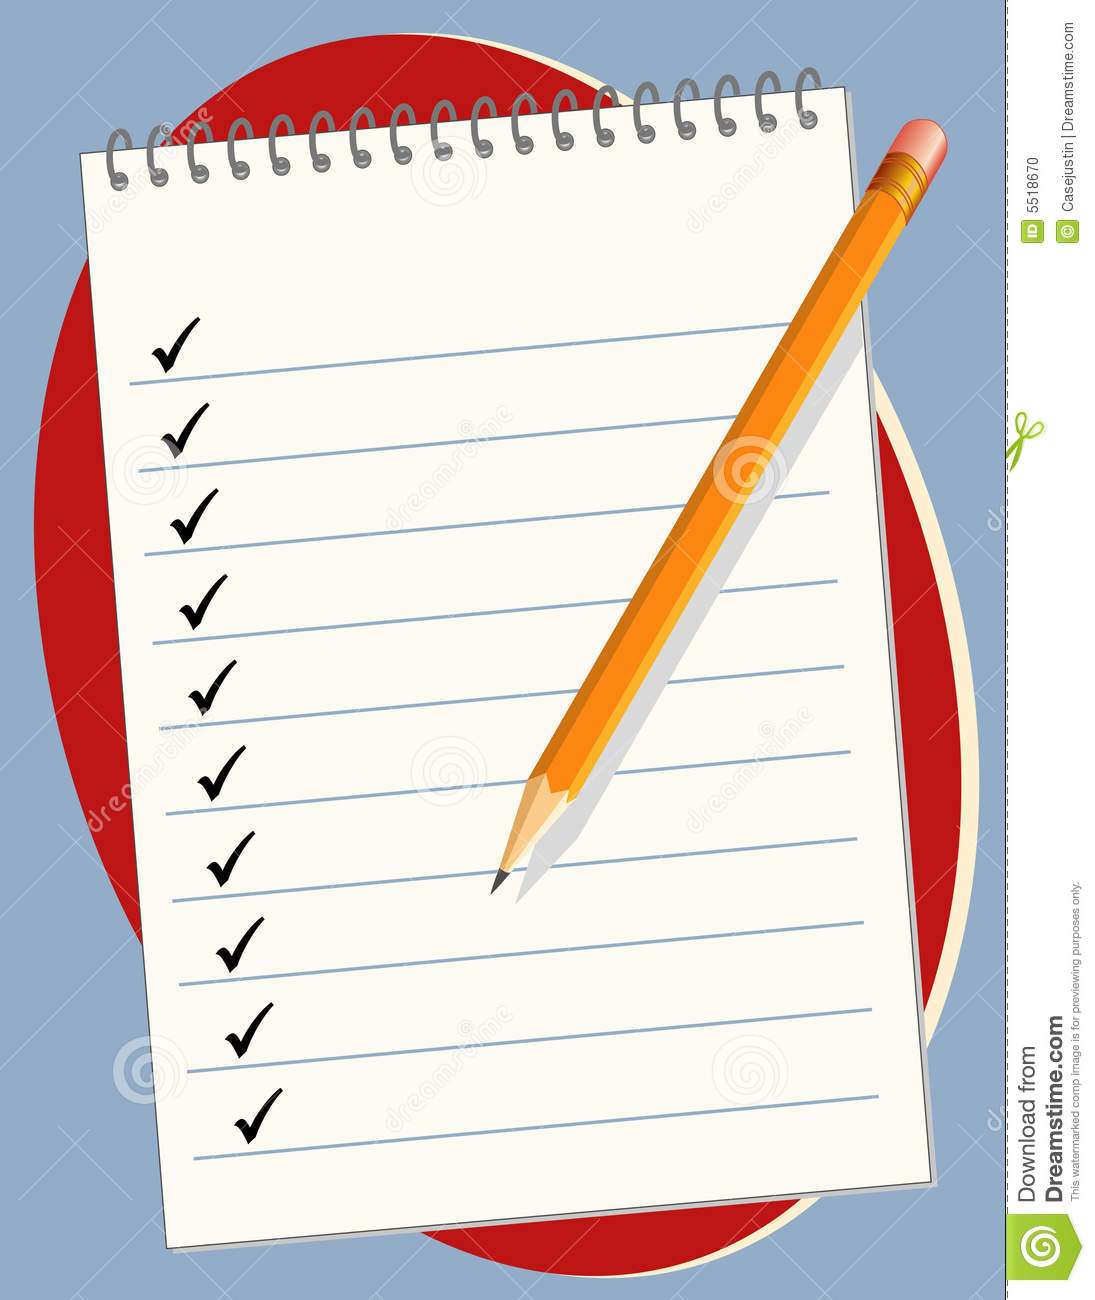 Checklist On A Steno Pad With Pencil  Copy Space To Add Your Own Text